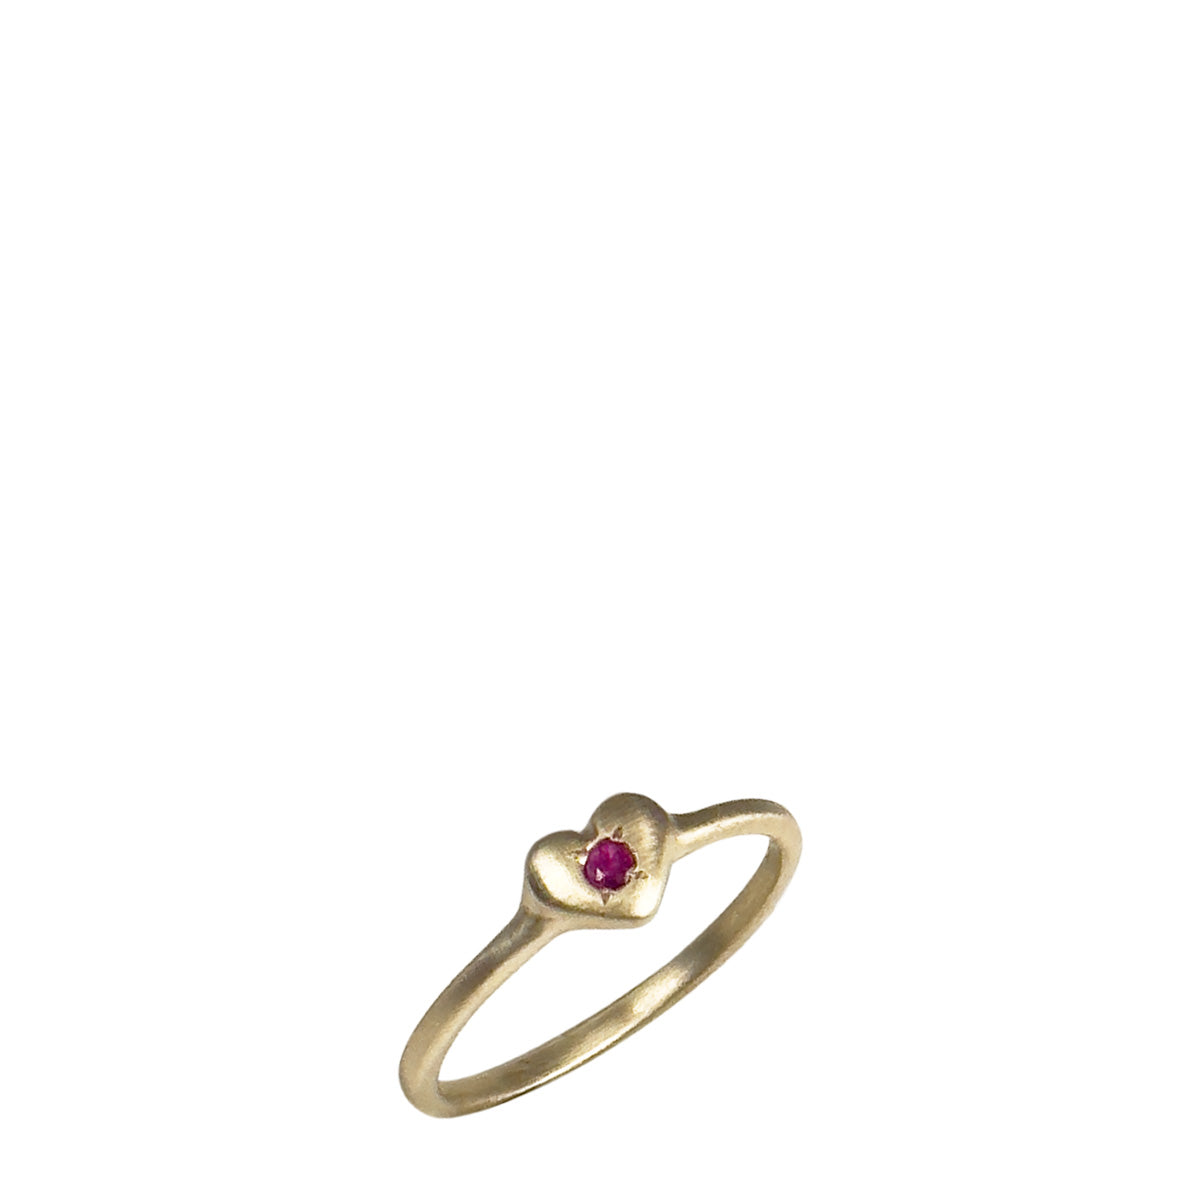 10K Gold Tiny Heart Ring with Ruby